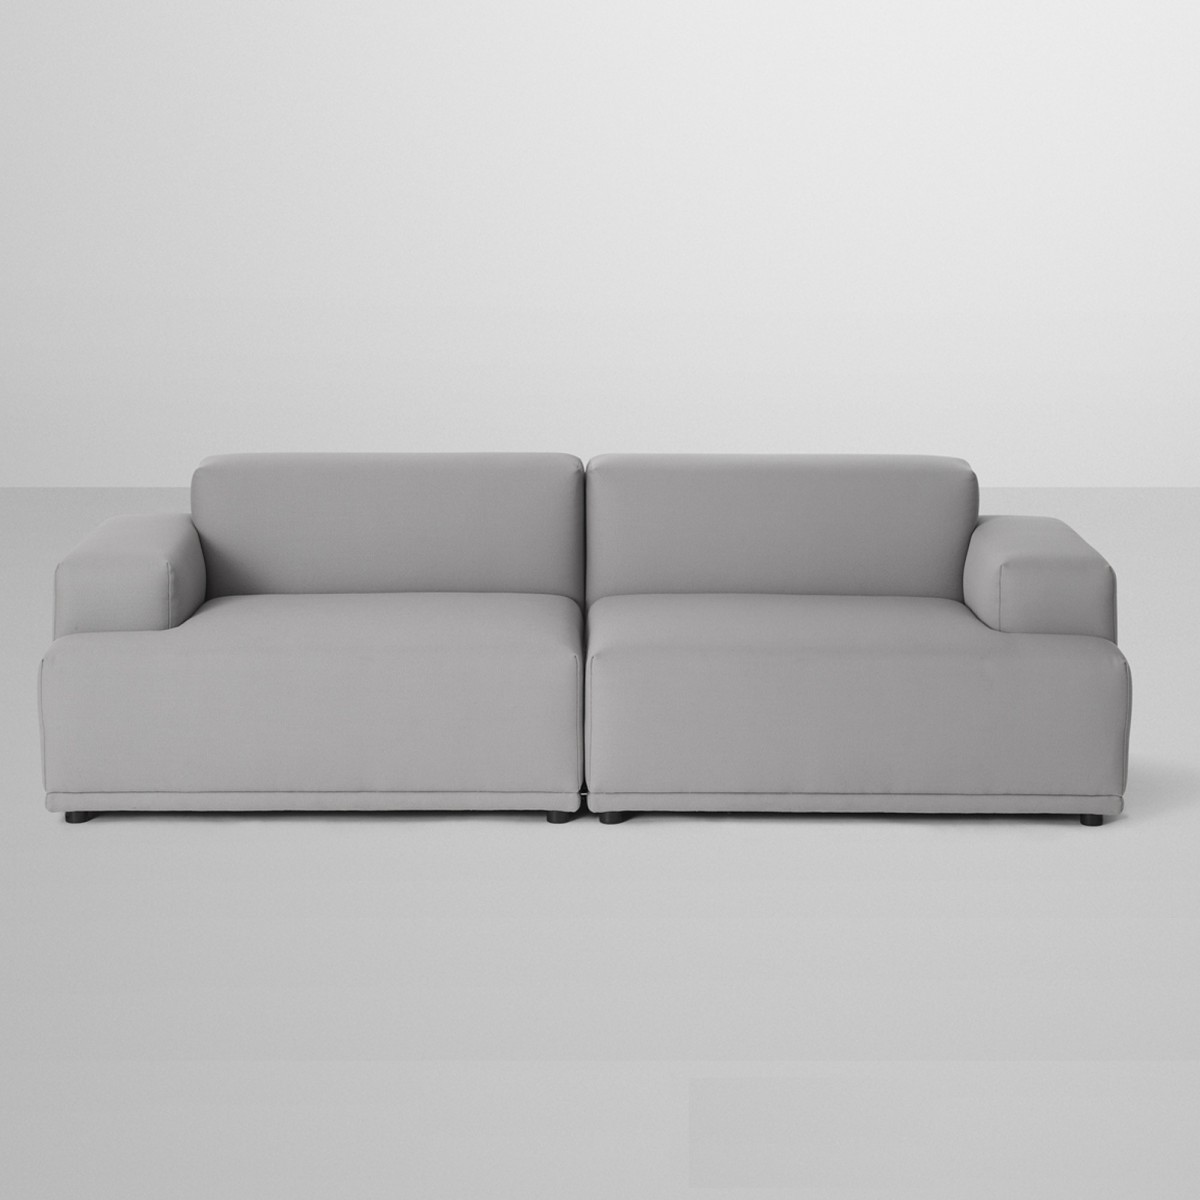 The Modular 2 Seaters Sofa Connect By, Muuto Modular Sofa System